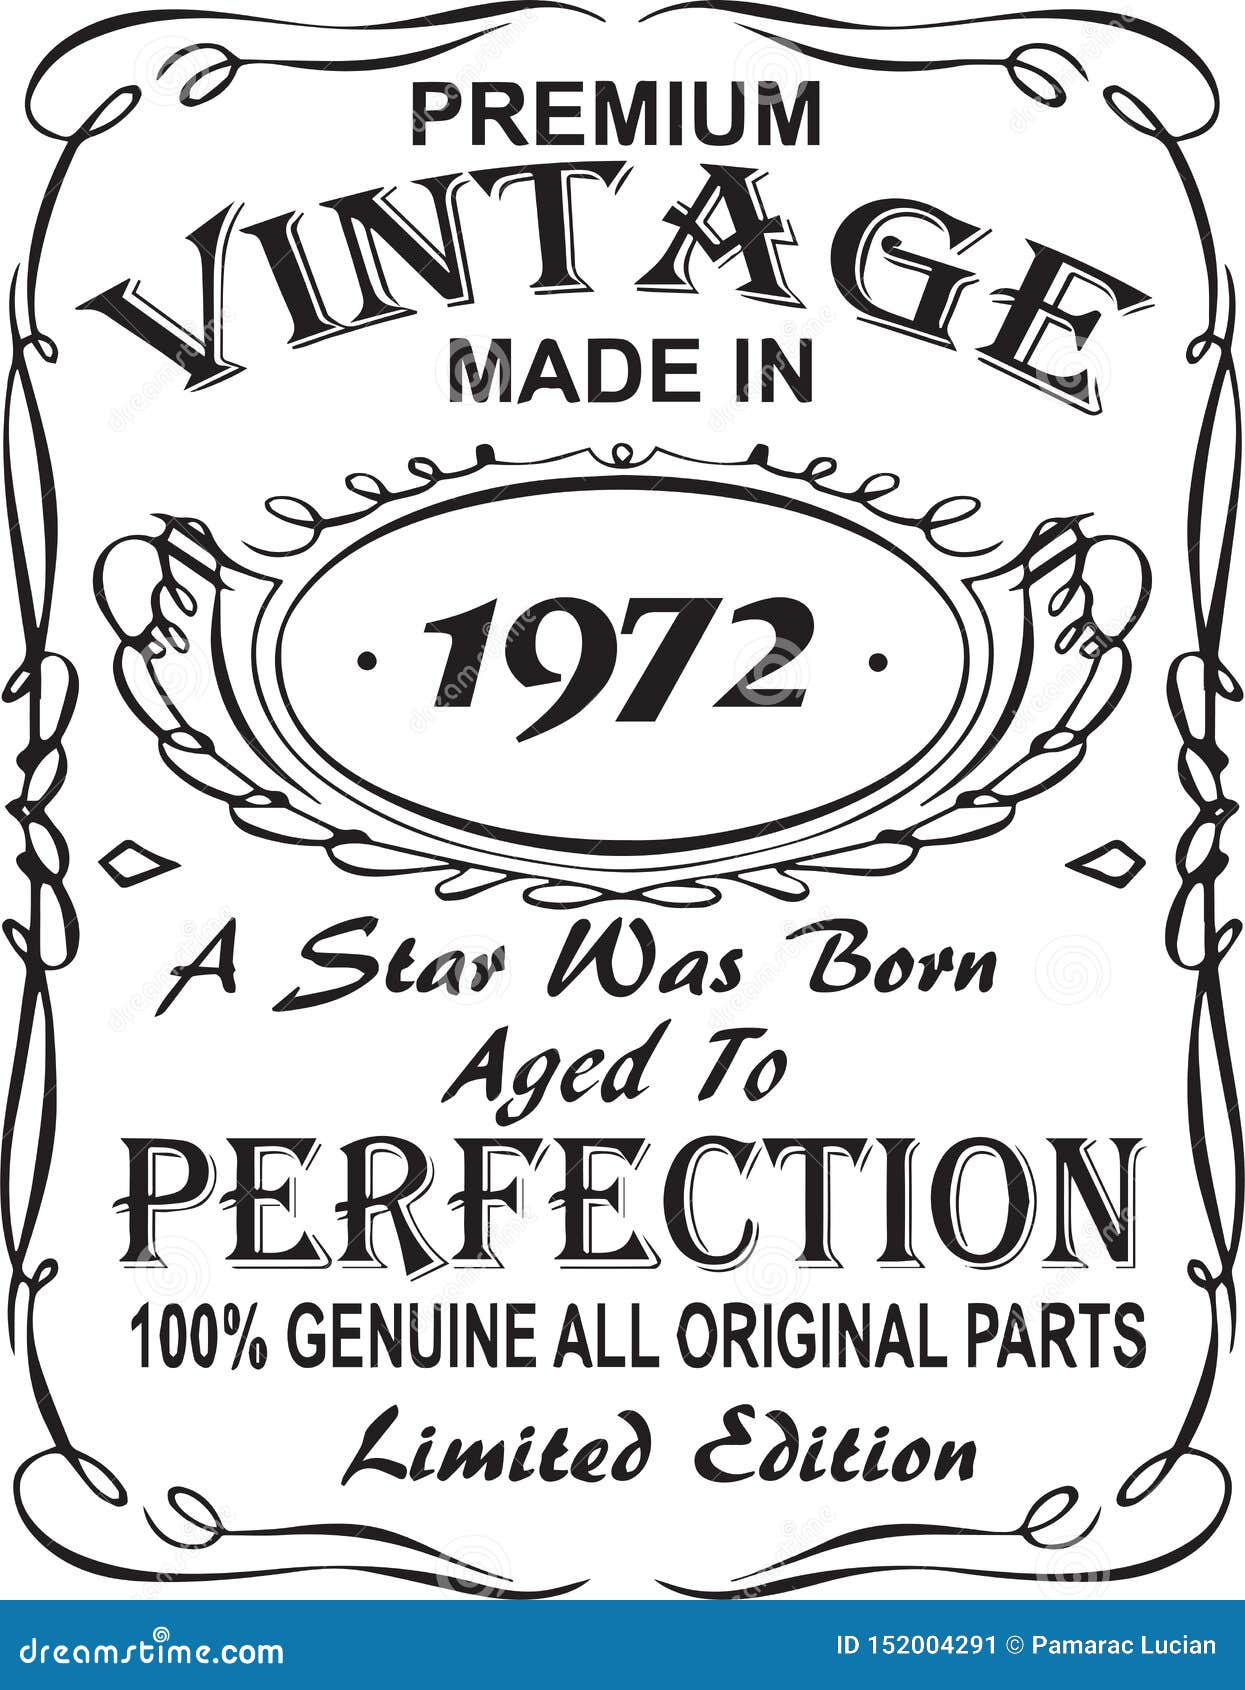 Vectorial T-shirt Print Design.Premium Vintage Made In 1972 A Star Was